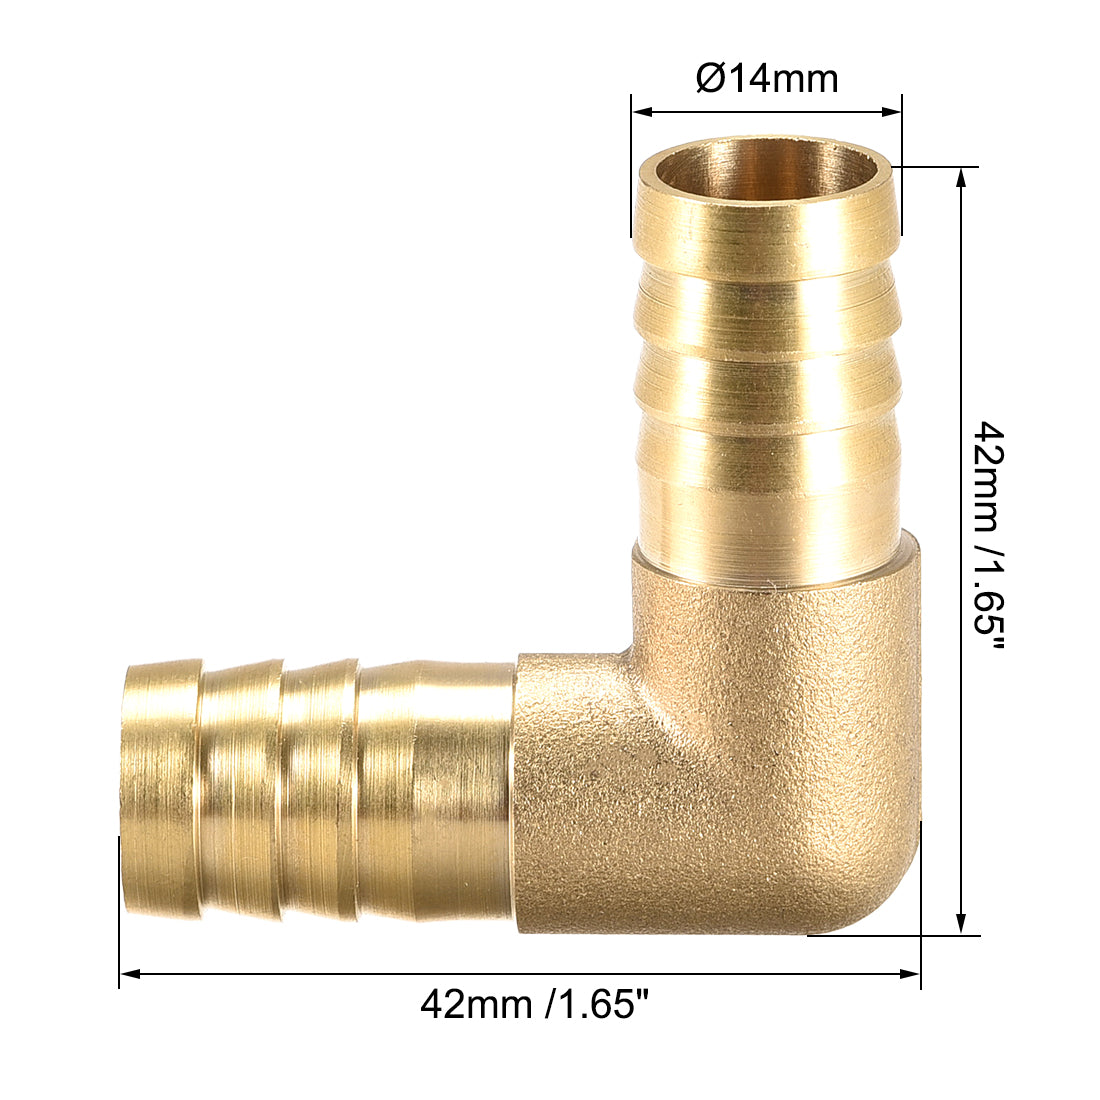 Uxcell Uxcell 19mm Barb Brass Hose Fitting 90 Degree Elbow Pipe Connector Coupler Tubing 2pcs